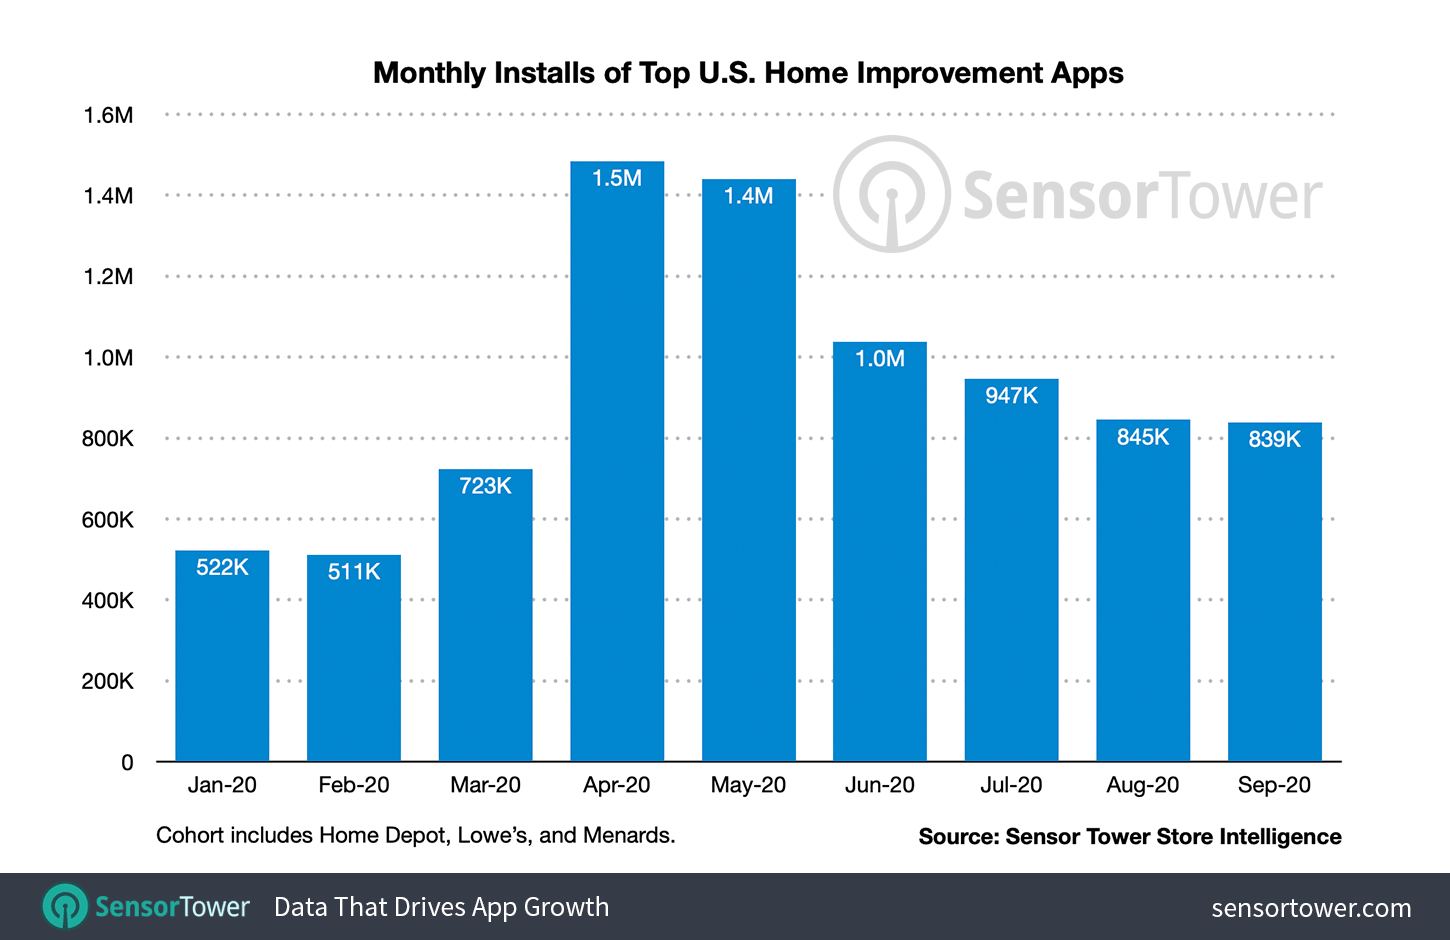 Monthly Installs of Top Home Improvement Apps in the U.S. During 2020